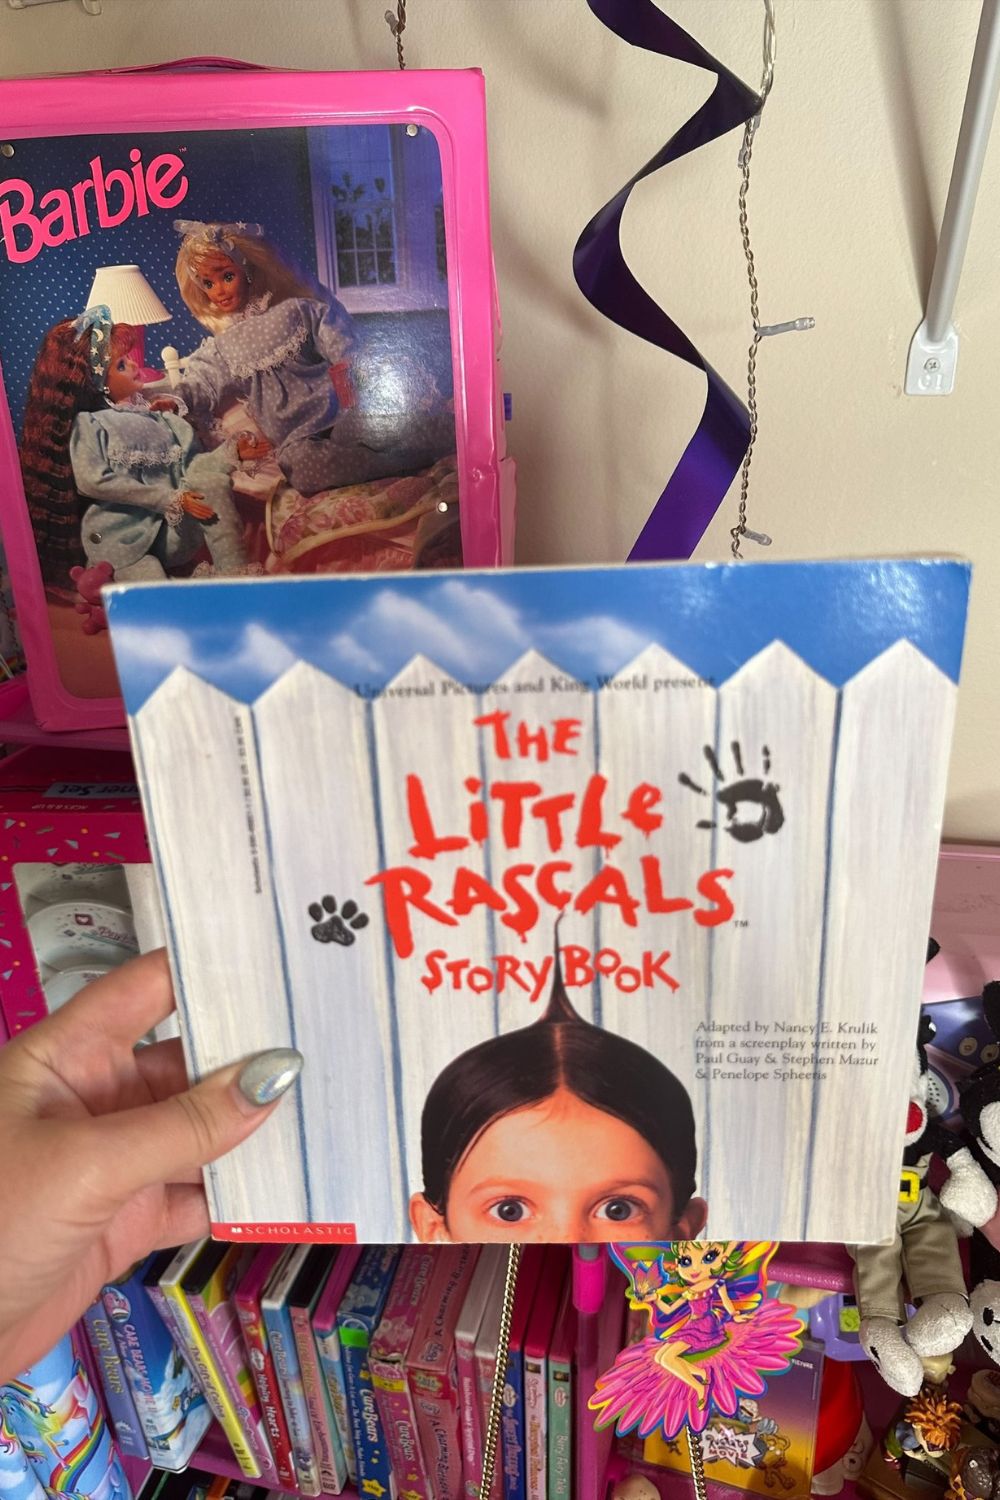 THE LITTLE RASCAL STORY BOOK*